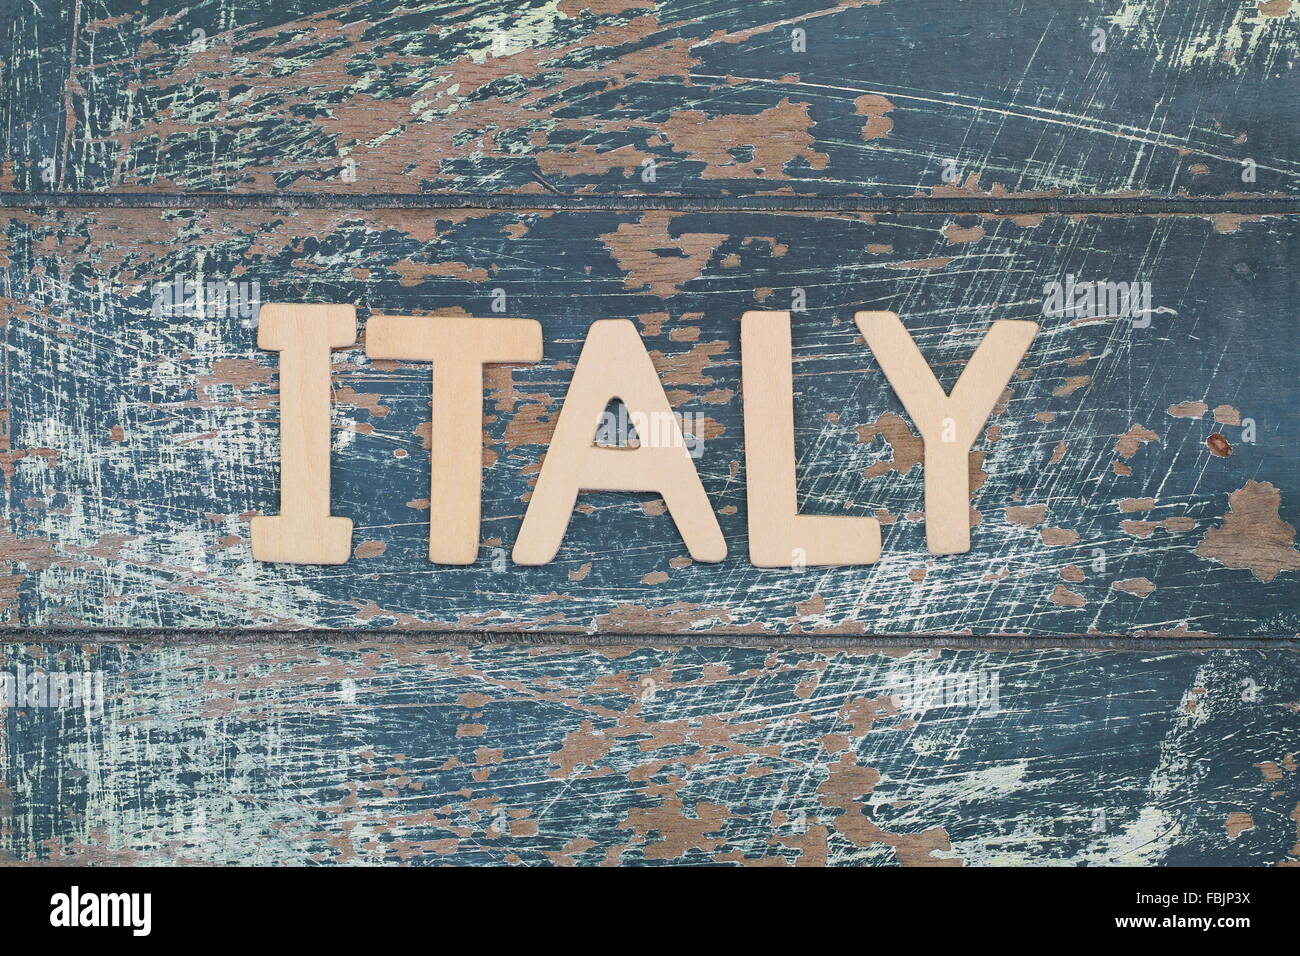 Italy written with wooden letters on rustic surface Stock Photo